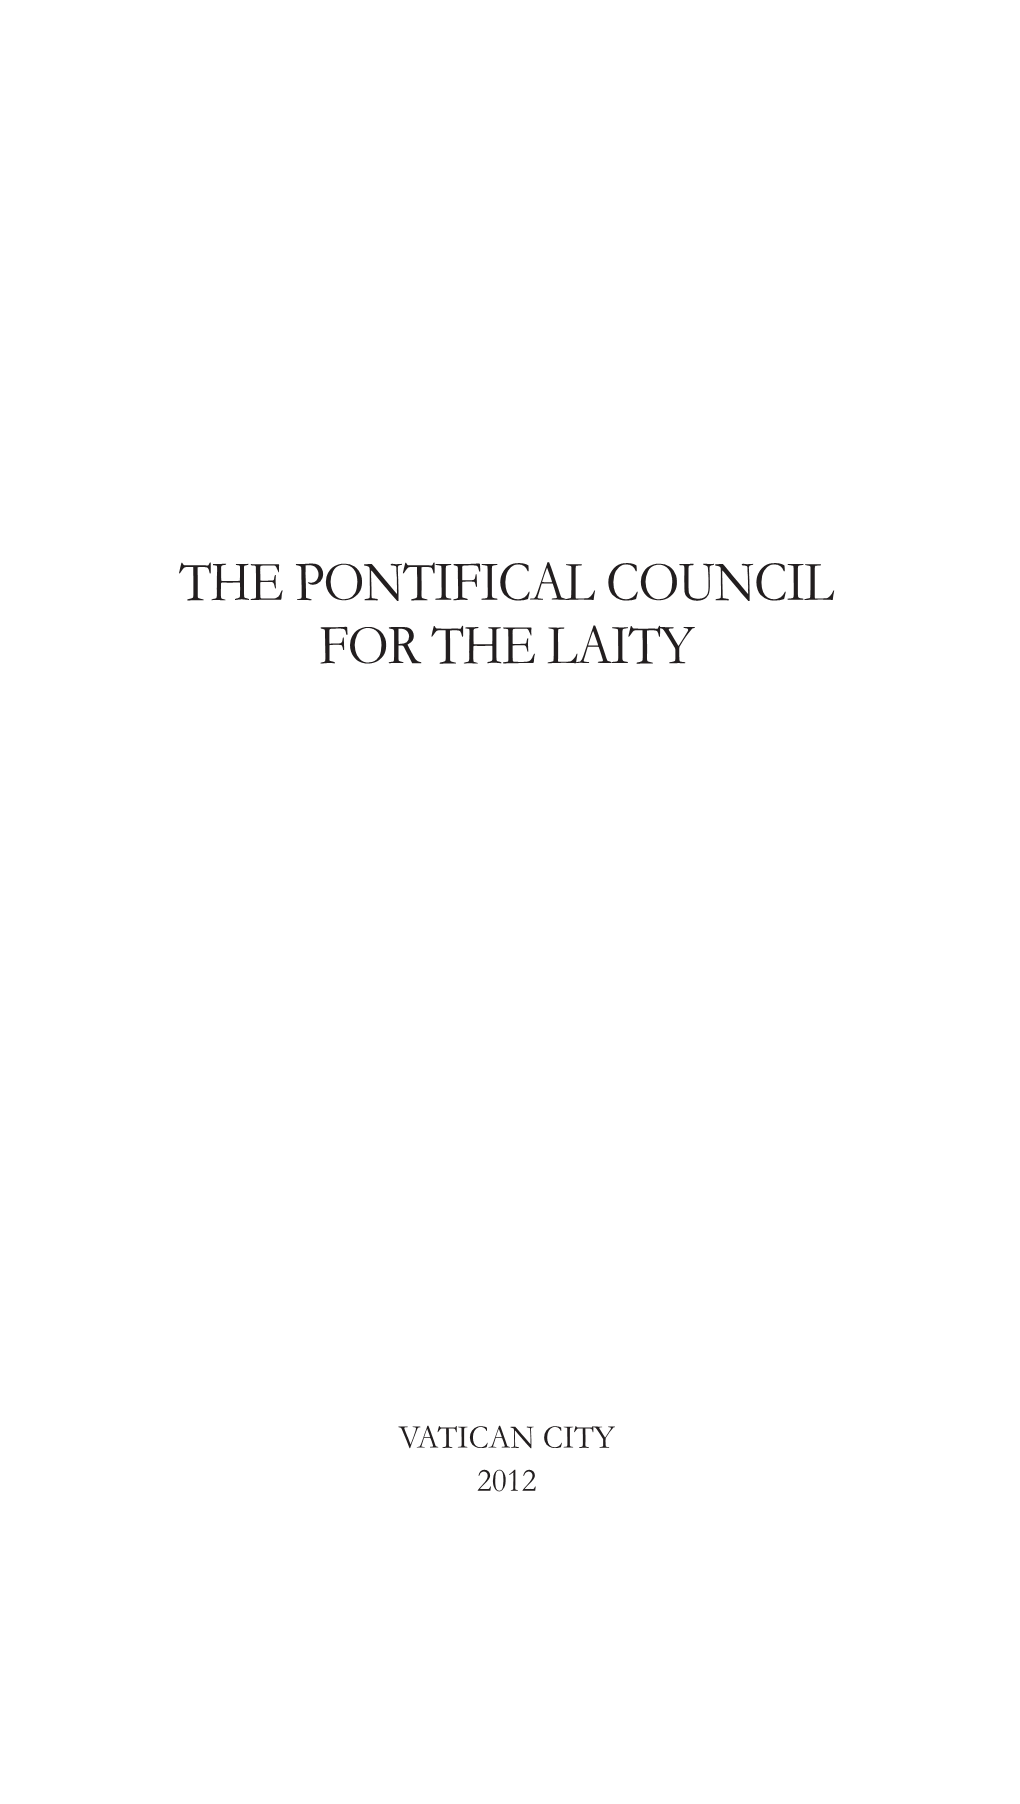 The Pontifical Council for the Laity